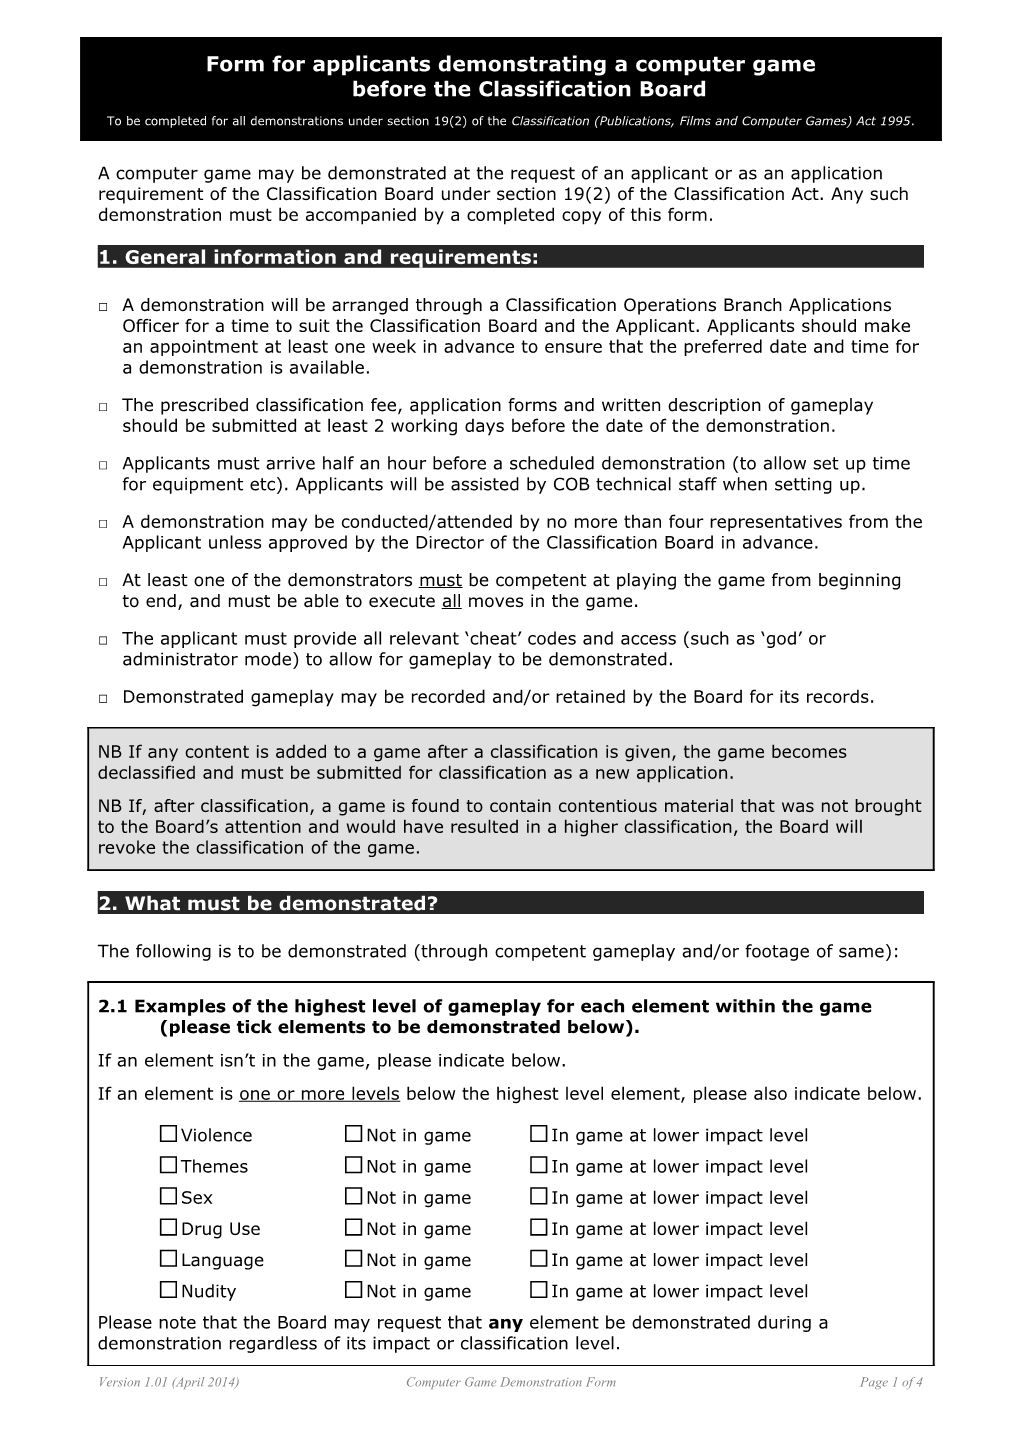 Form for Applicants Demonstrating a Computer Game